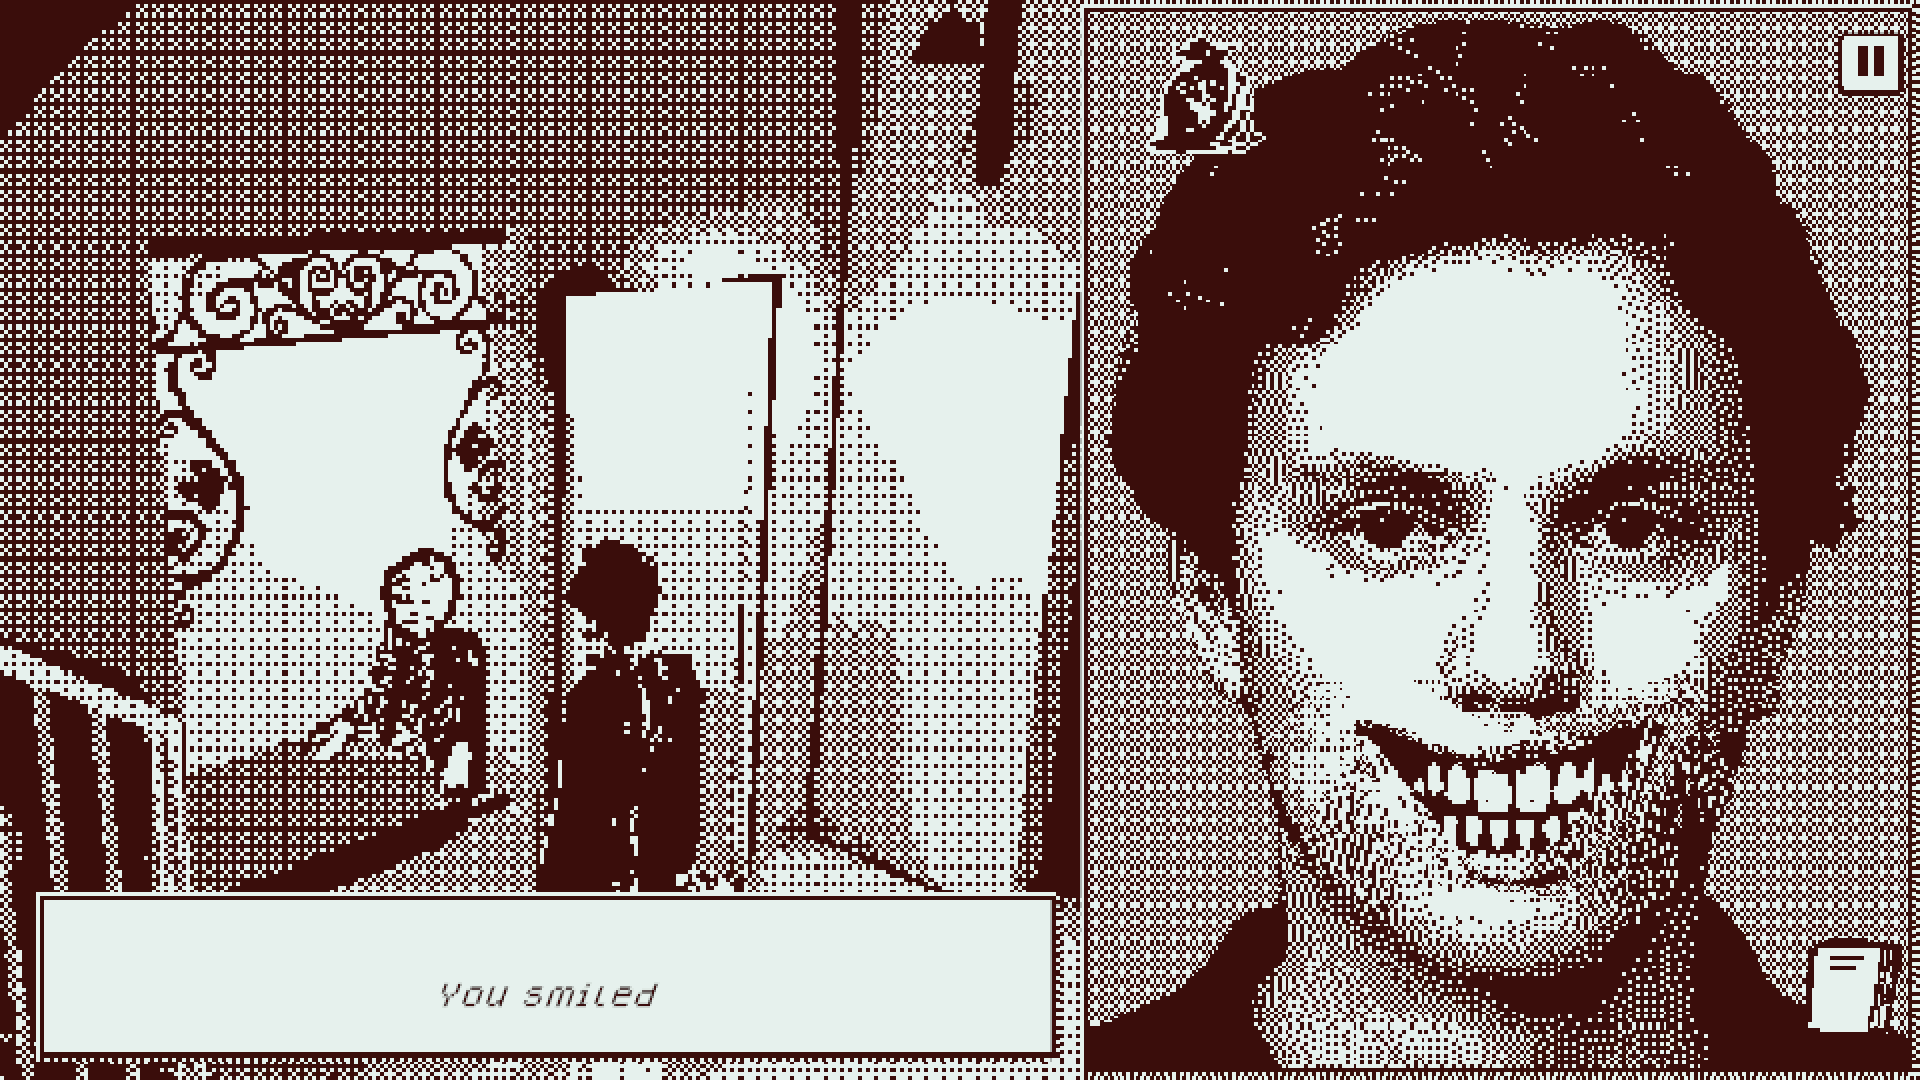 This strange adventure game is controlled by pulling faces thumbnail